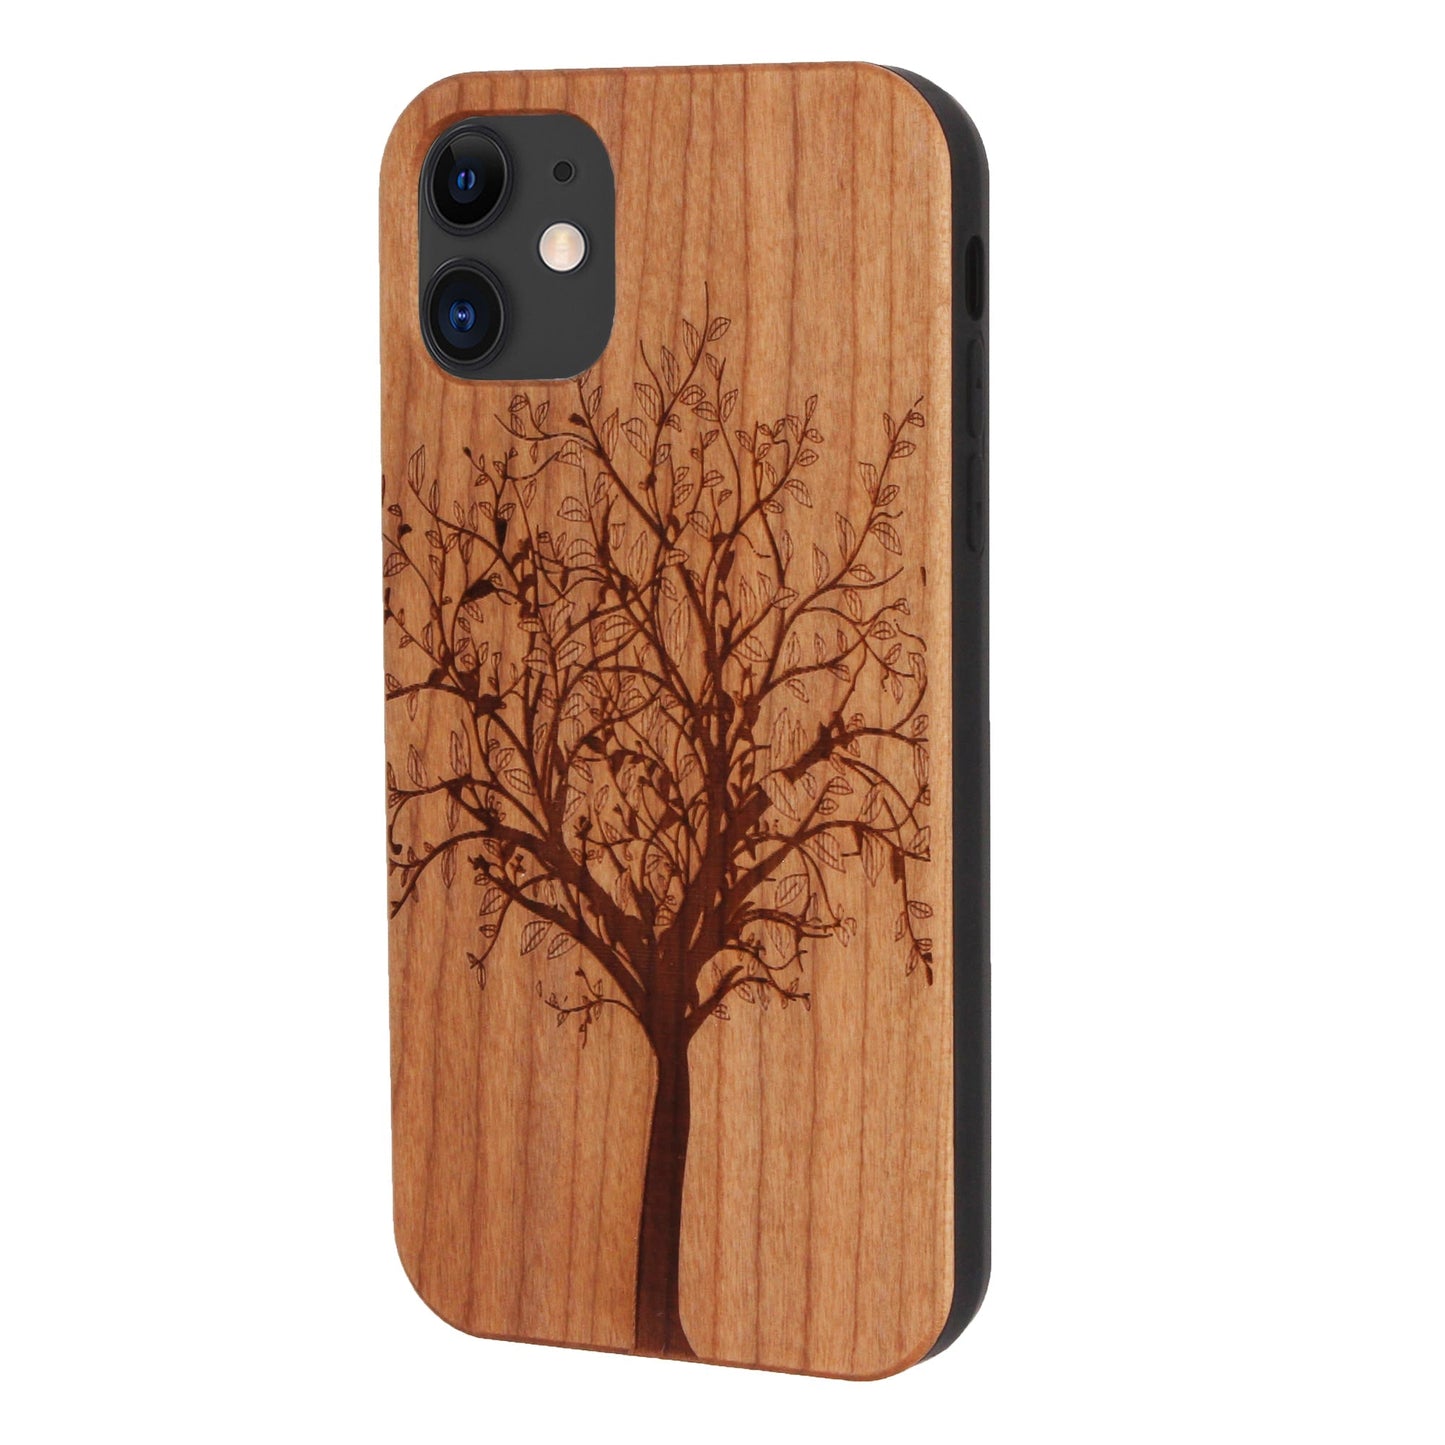 Tree of Life Eden case made of cherry wood for iPhone 11